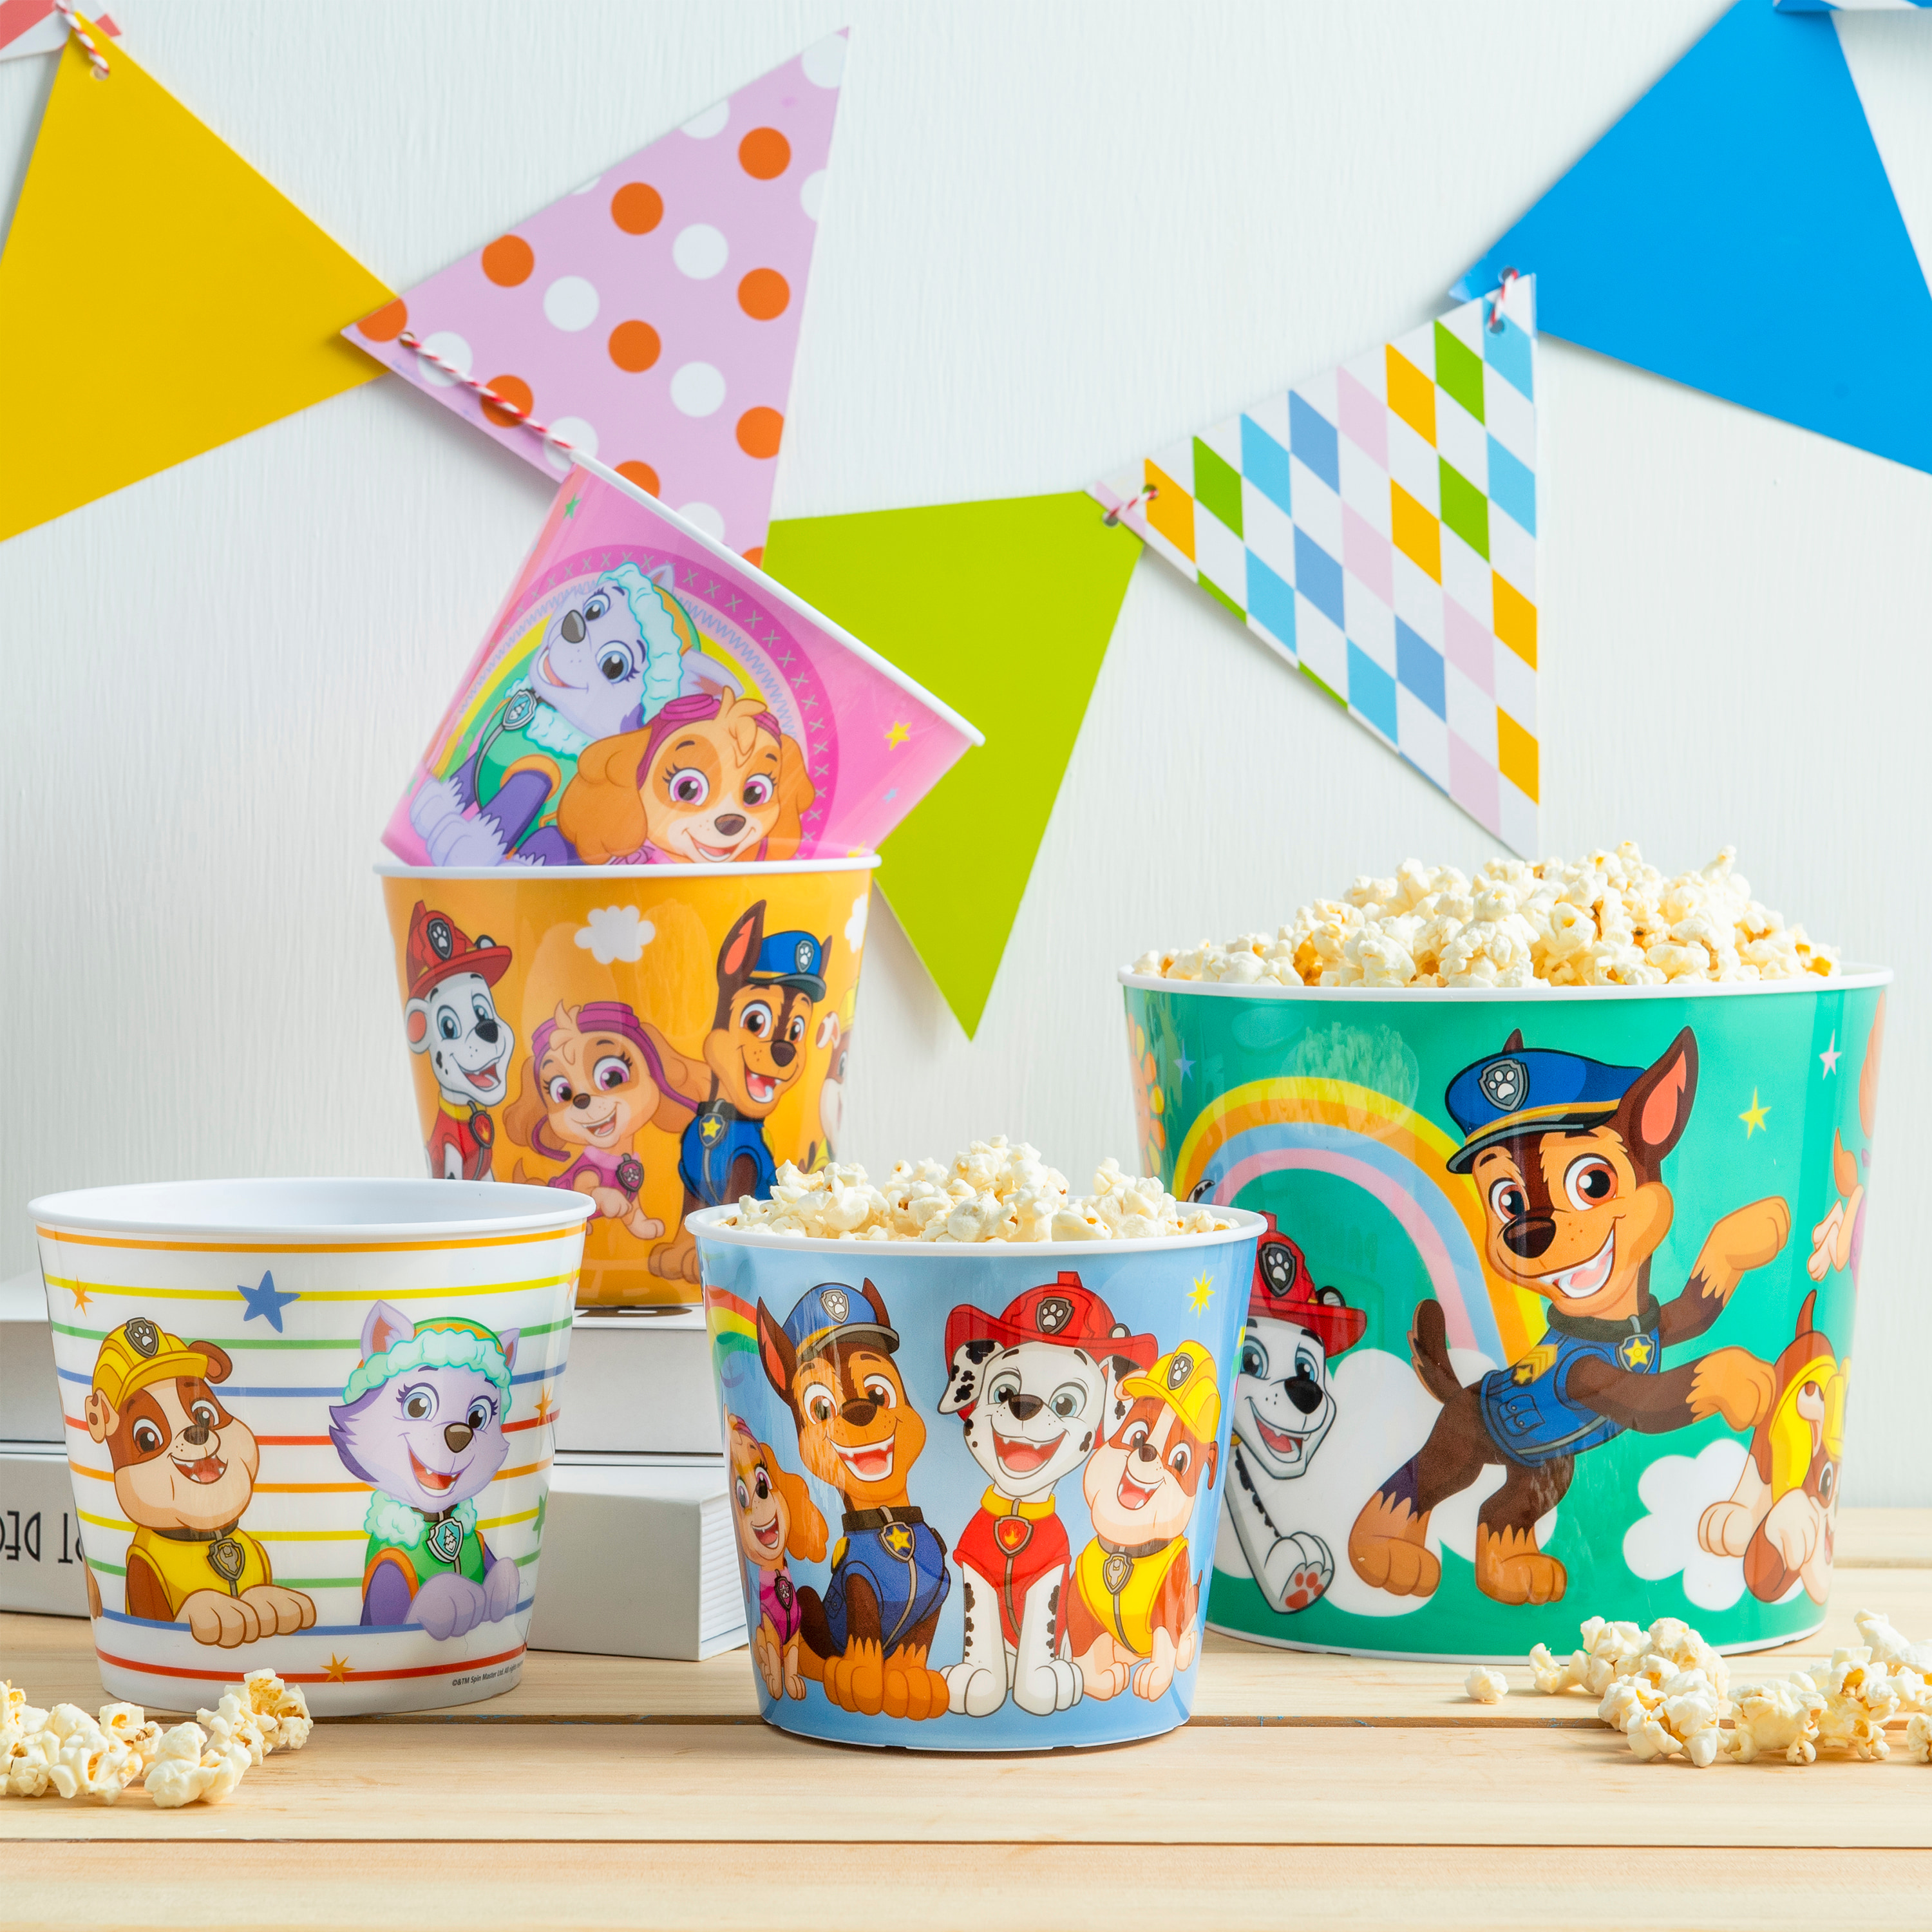 Paw Patrol Plastic Popcorn Container and Bowls, Chase, Marshall and Friends, 5-piece set slideshow image 7